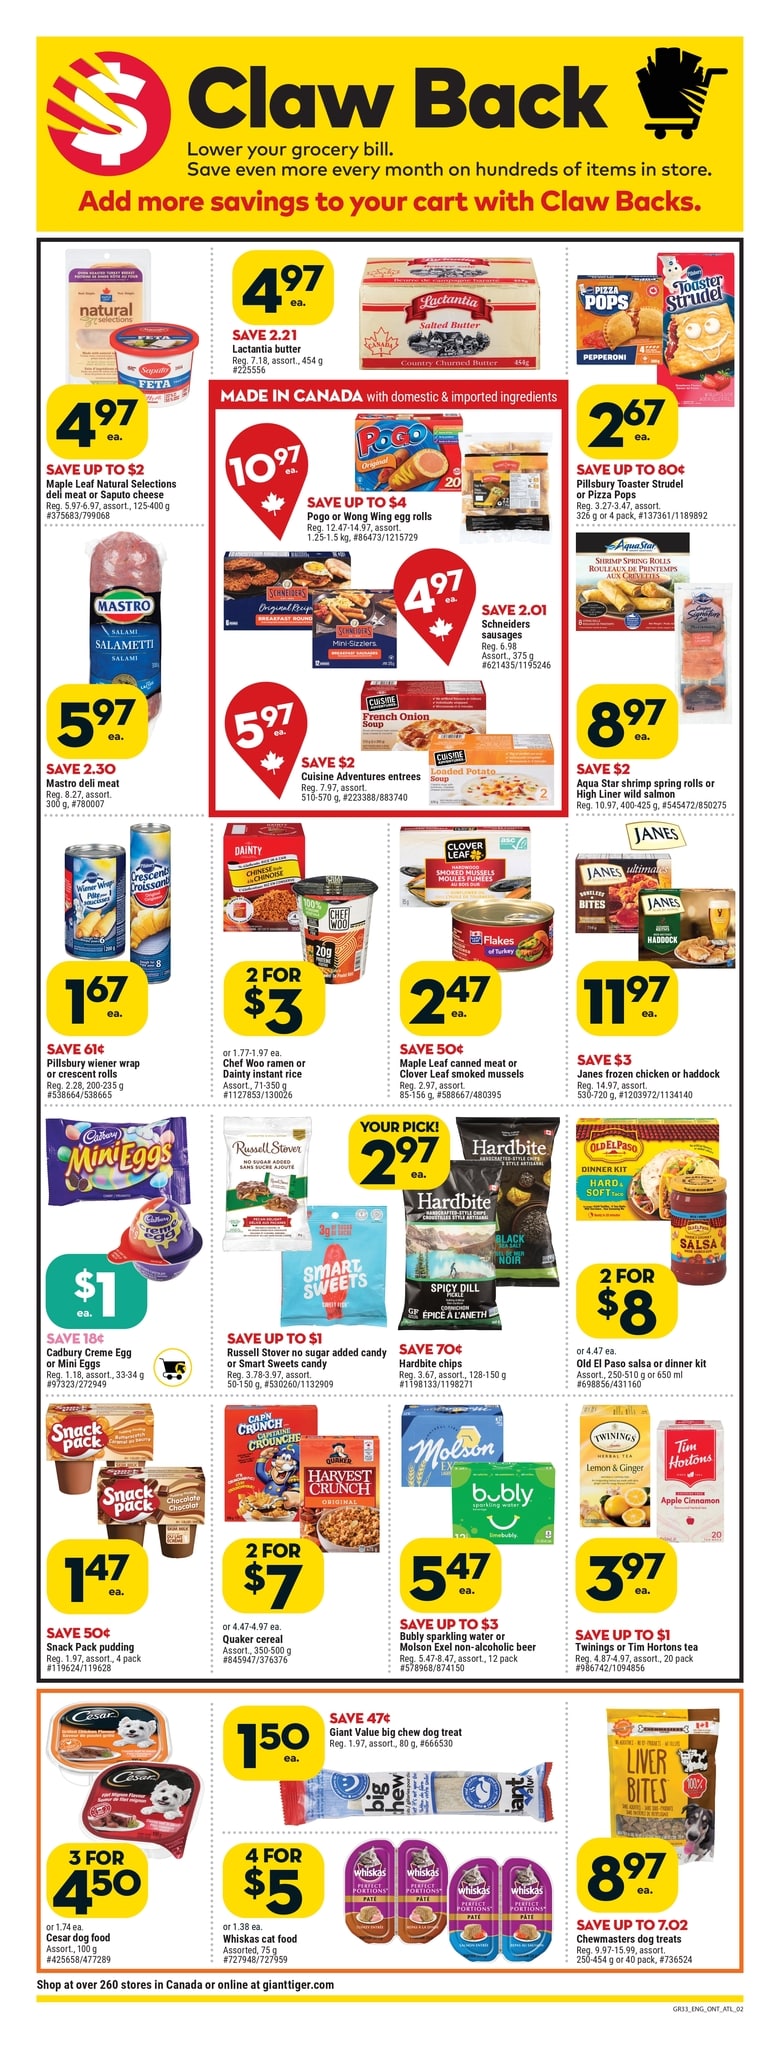 Giant Tiger - Weekly Flyer Specials - Page 3